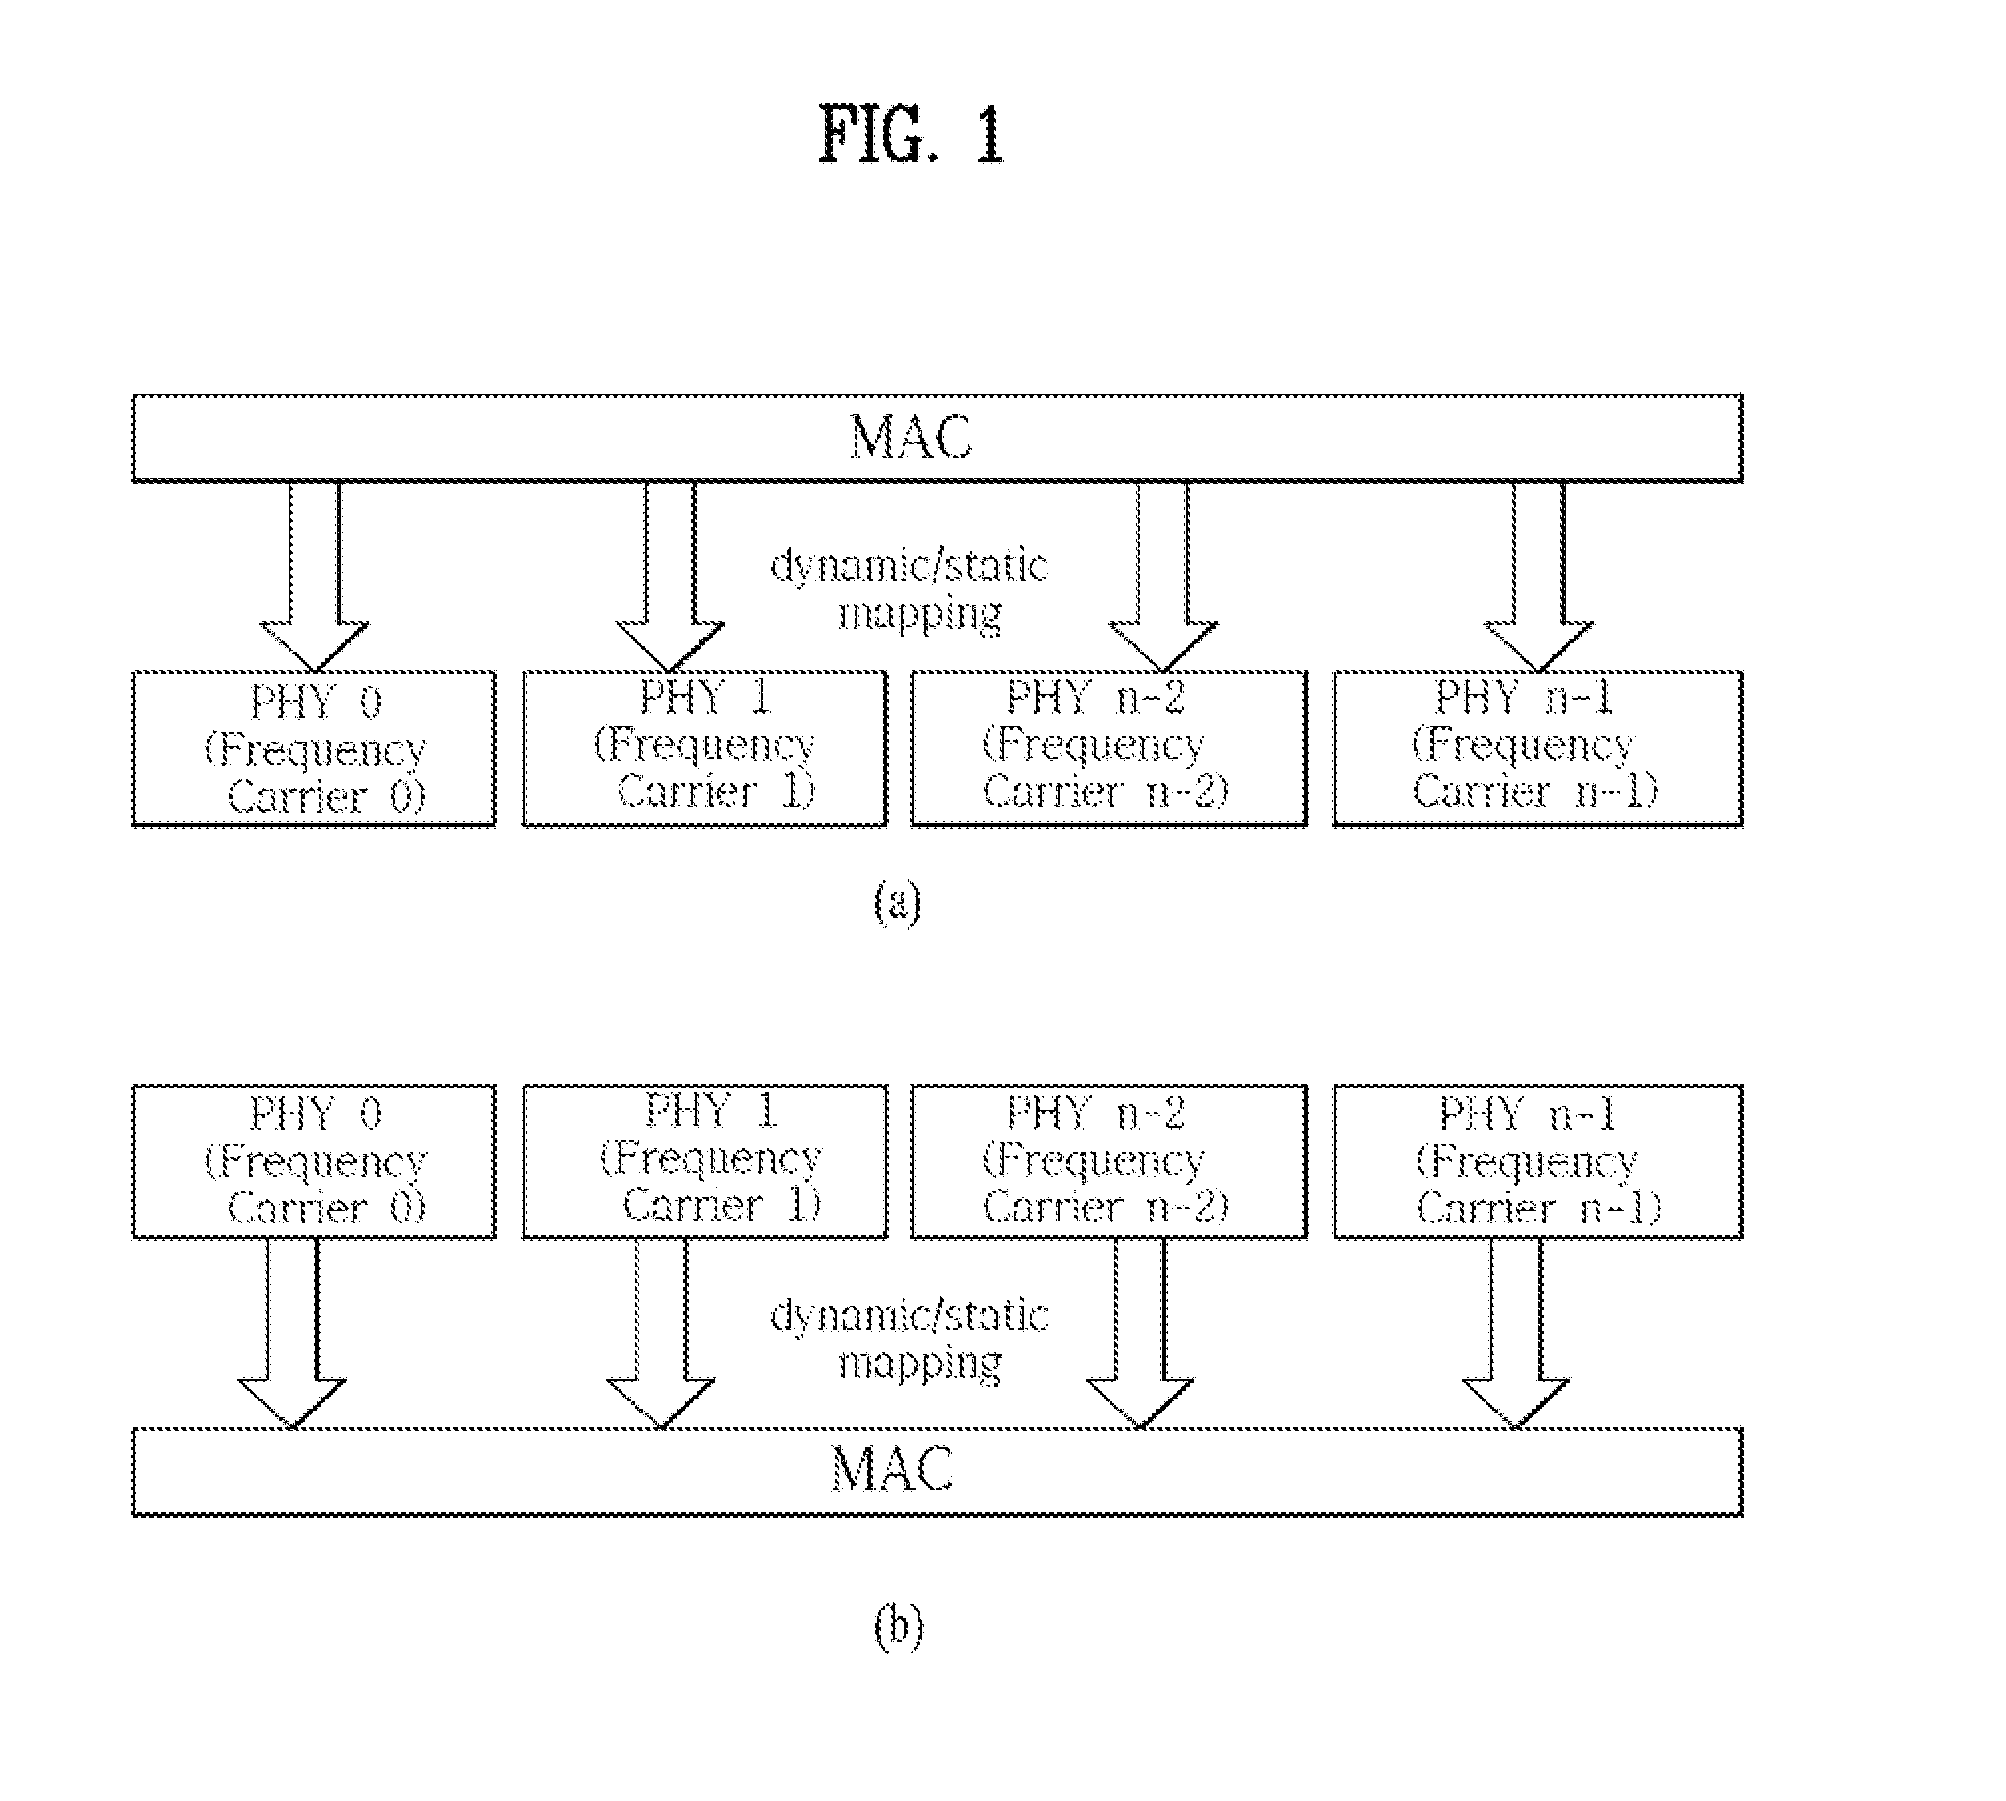 Efficient handover/scanning trigger method in a broadband wireless access system supporting a multicarrier